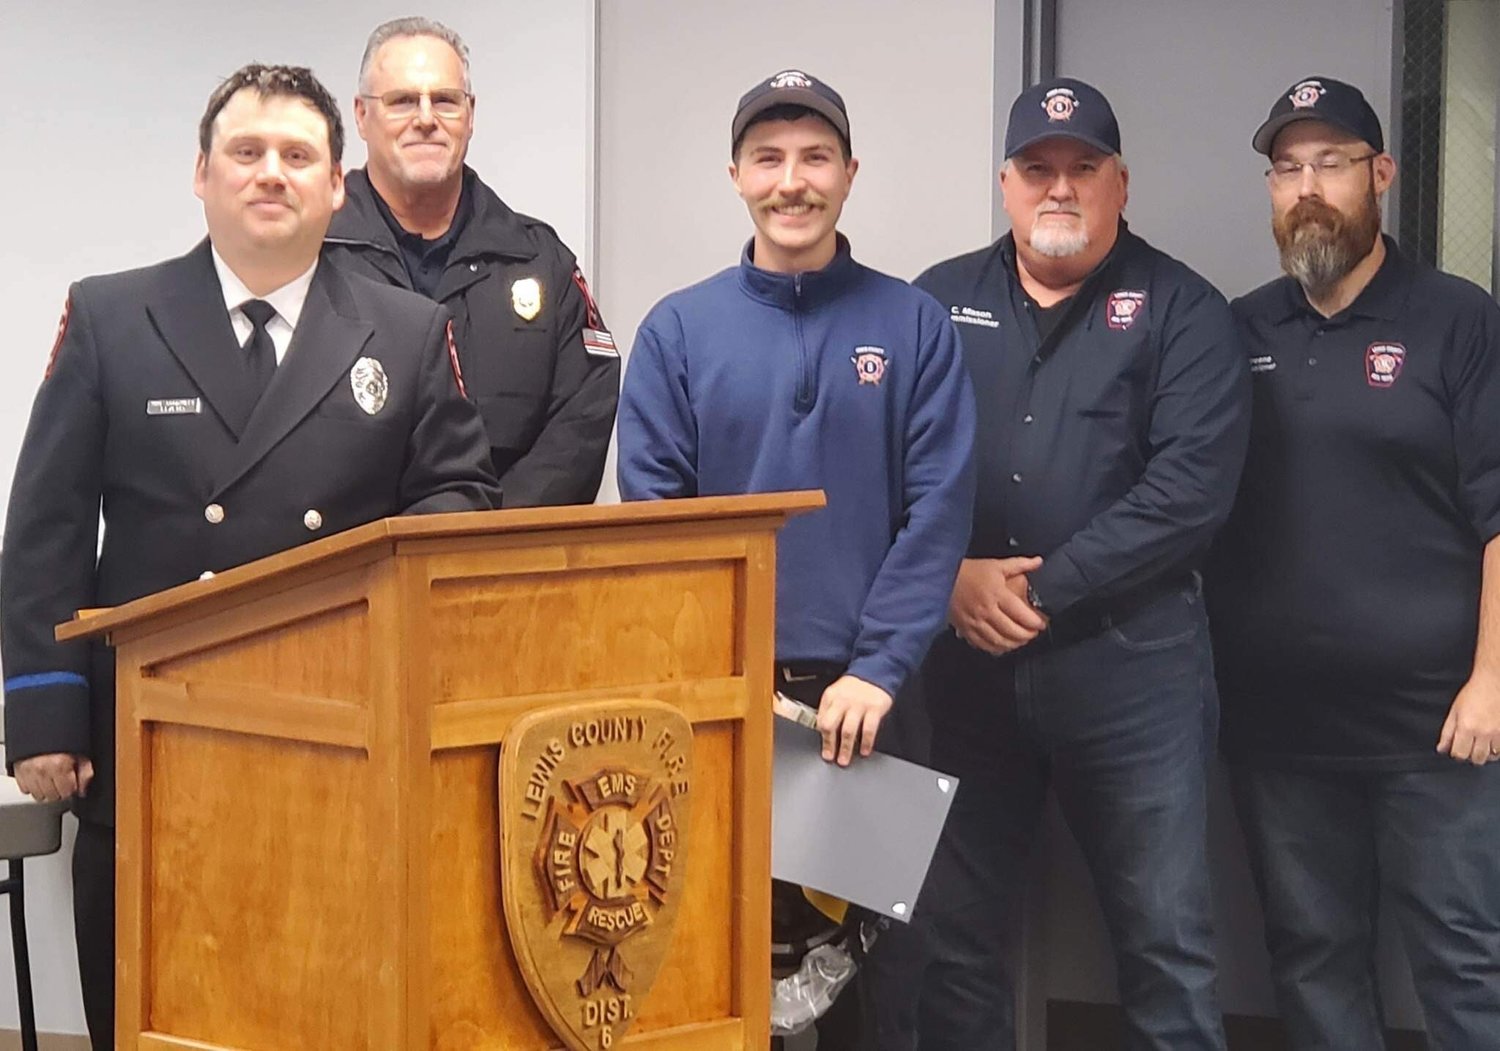 Recruit Graduate Mackenzie Kukas receiving his certificate, helmet and challenge coin. From left, firefighter Mike Goodwillie, Fire Chief Ken Cardinale, Kukas, Board Chair Colin Mason and Commissioner Greg Greene.